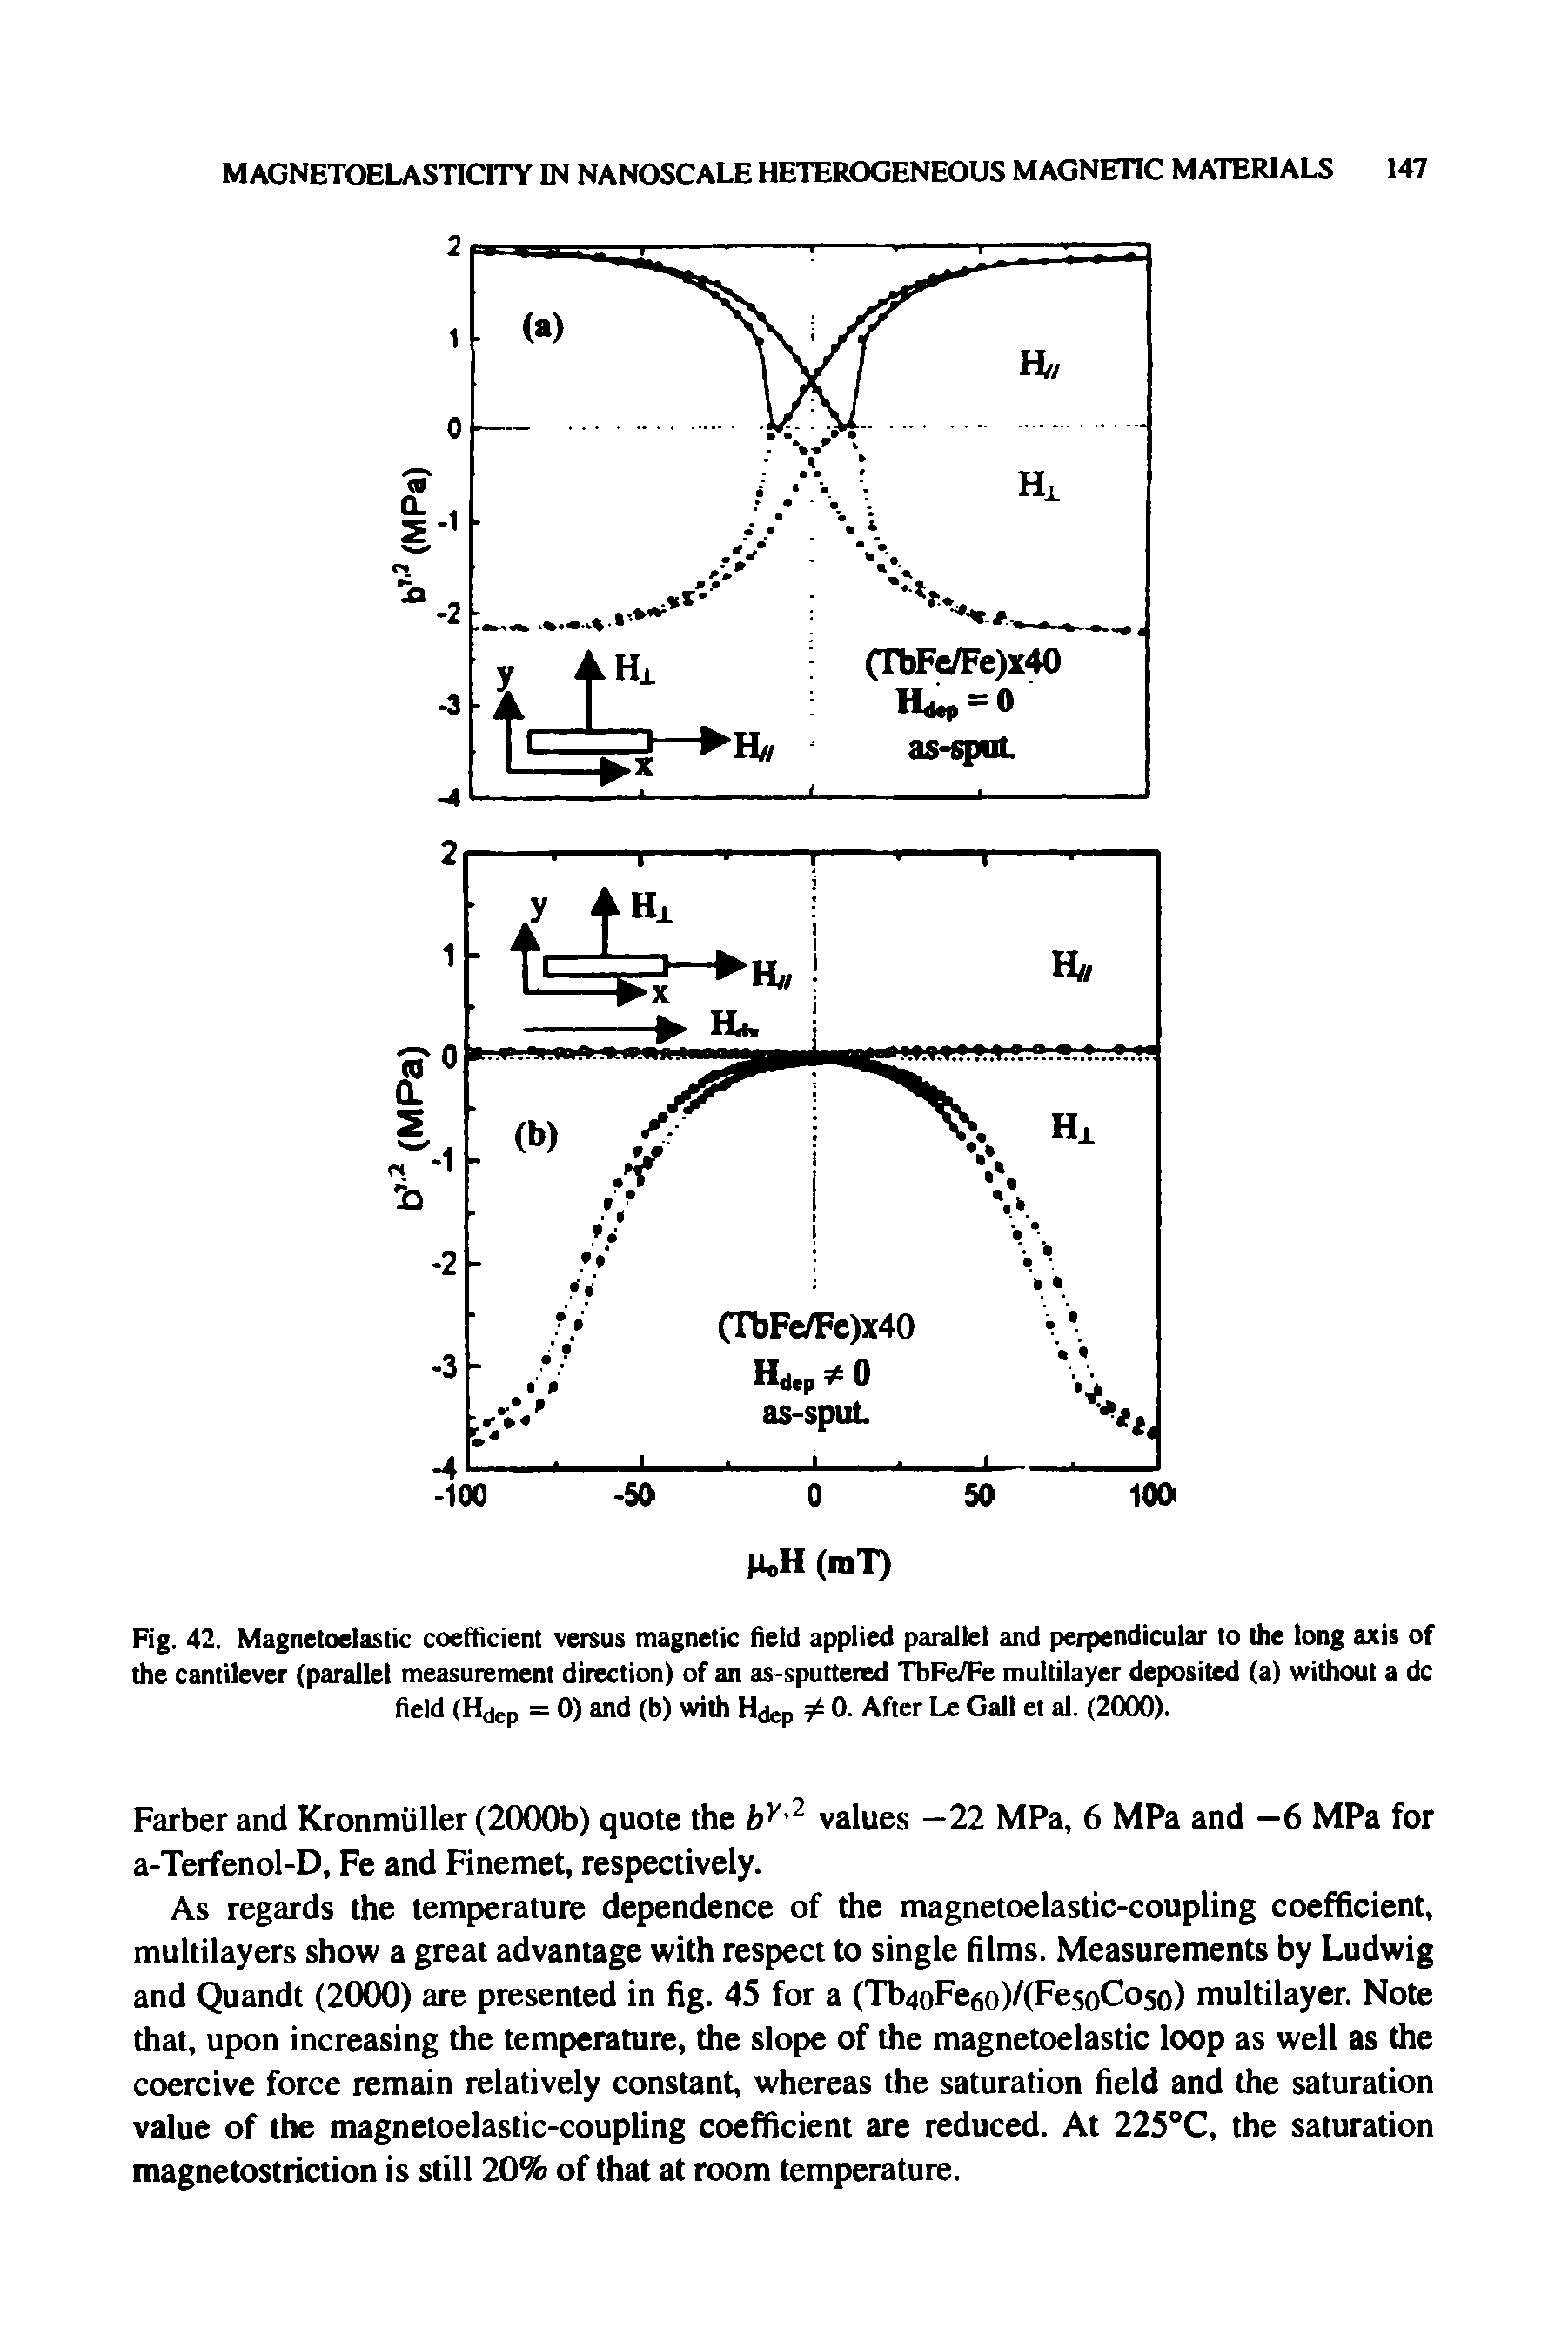 Fig. 42. Magnetoelastic coefficient versus magnetic field applied parallel and perpendicular to the long axis of the cantilever (parallel measurement direction) of an as-sputtered TbFe/Fe multilayer deposited (a) without a dc field (H<jep = 0) and (b) with H<jep 0. After Le Gall et al. (2000).